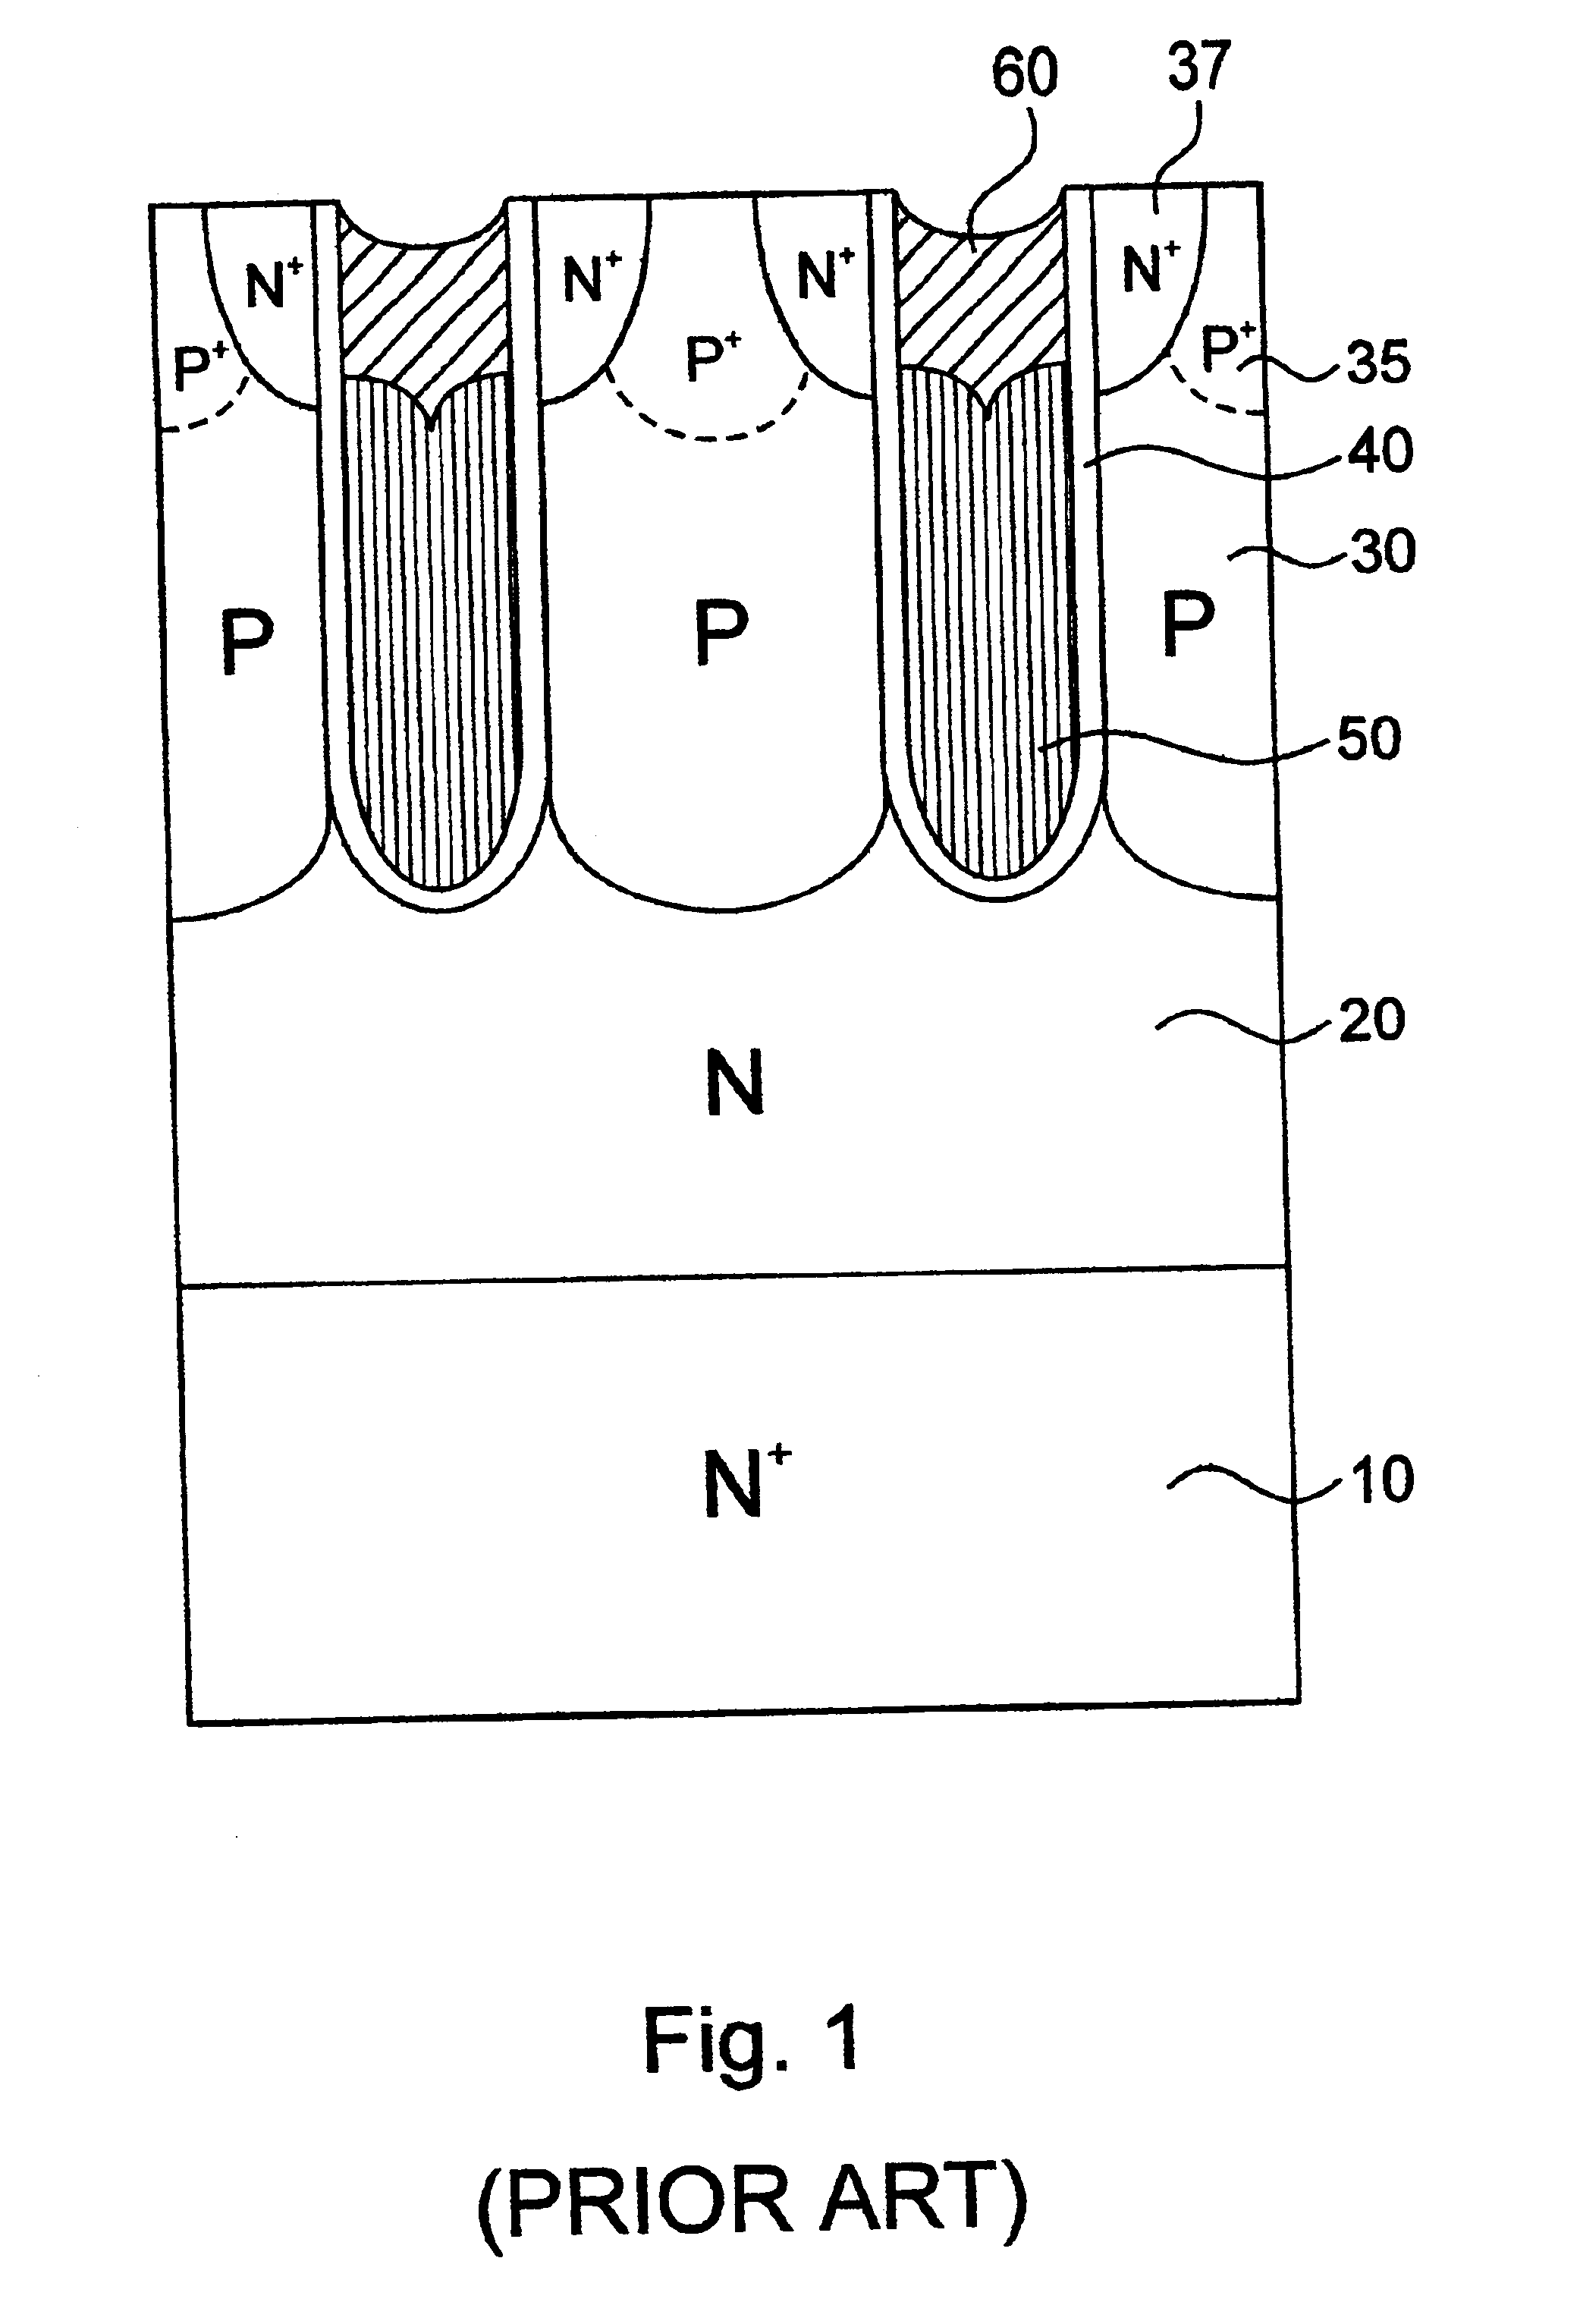 Low voltage high density trench-gated power device with uniformly doped channel and its edge termination technique